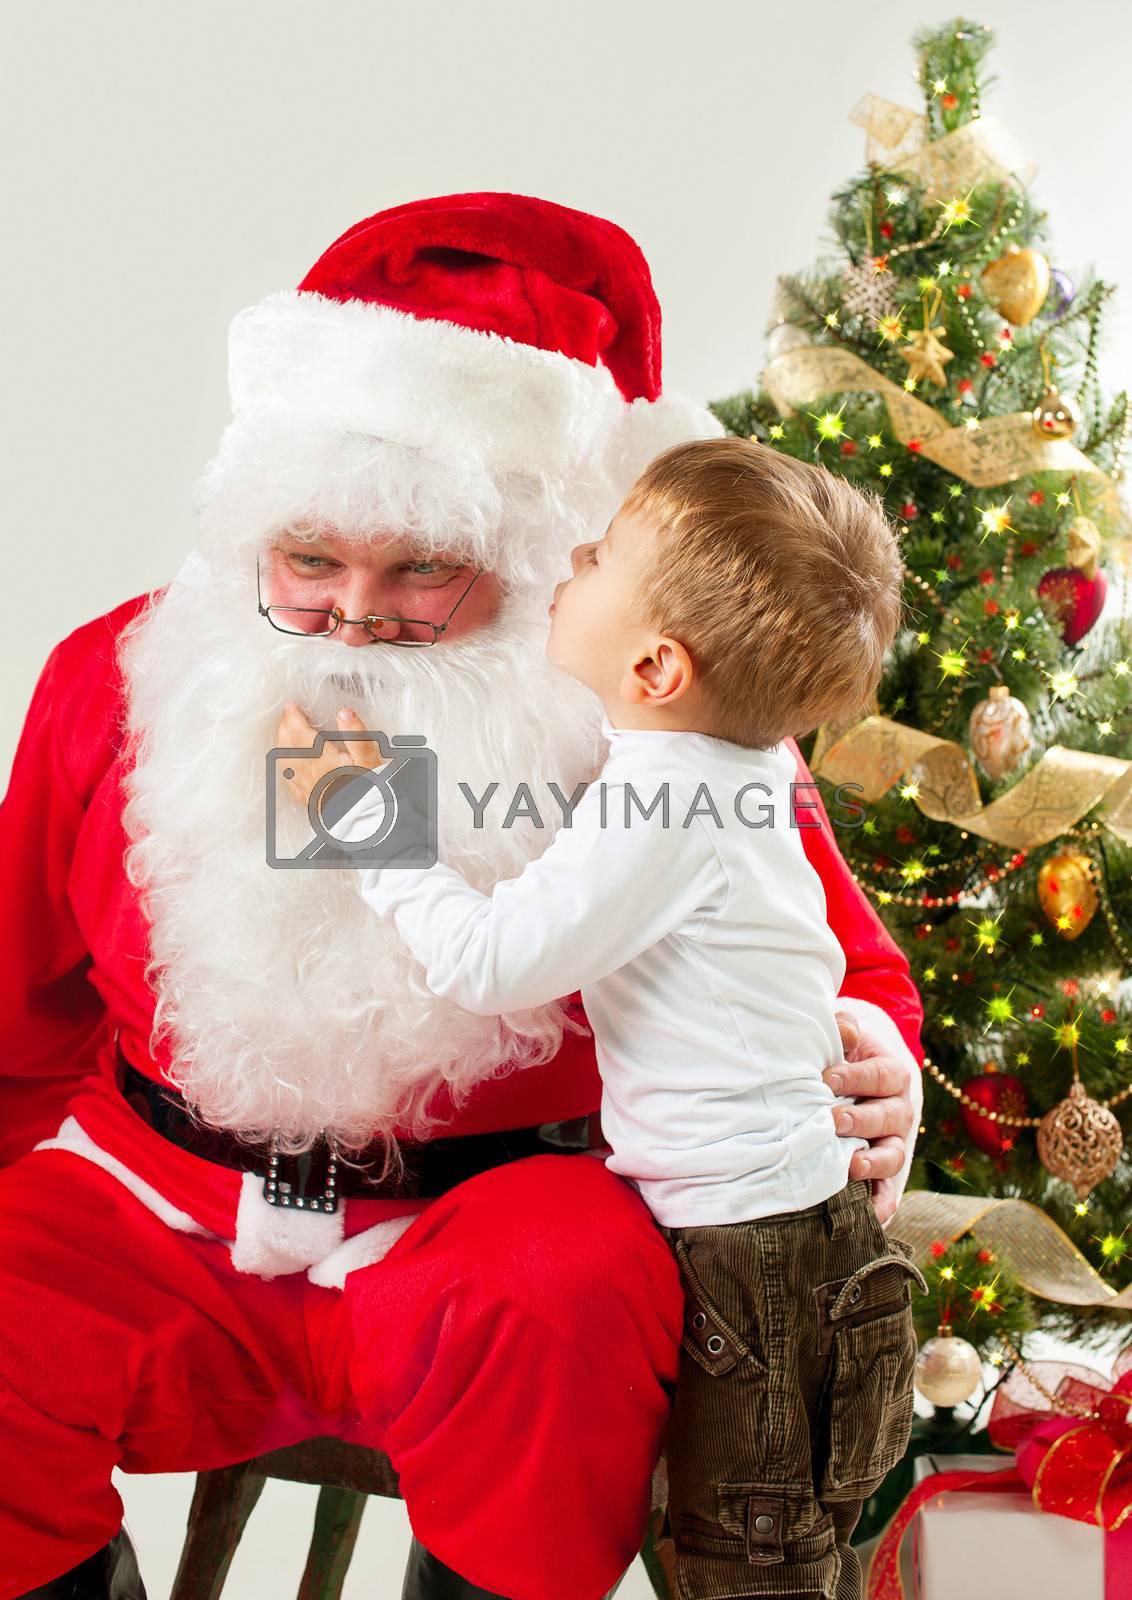 Royalty free image of Santa Claus and Little Boy. Christmas Scene by SubbotinaA